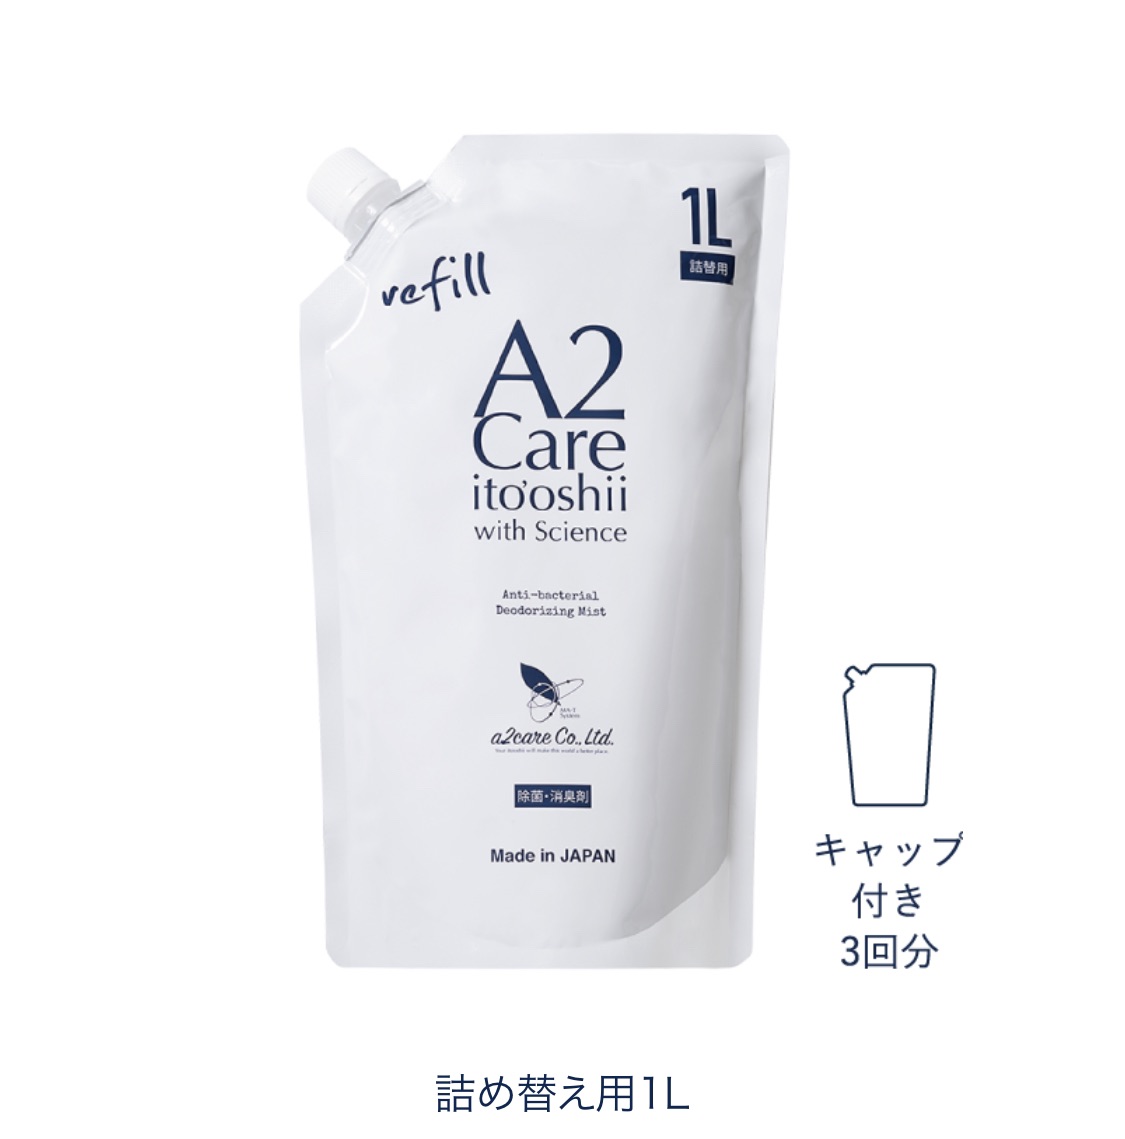 a2care 1リットル詰め替え用　【2個セット】